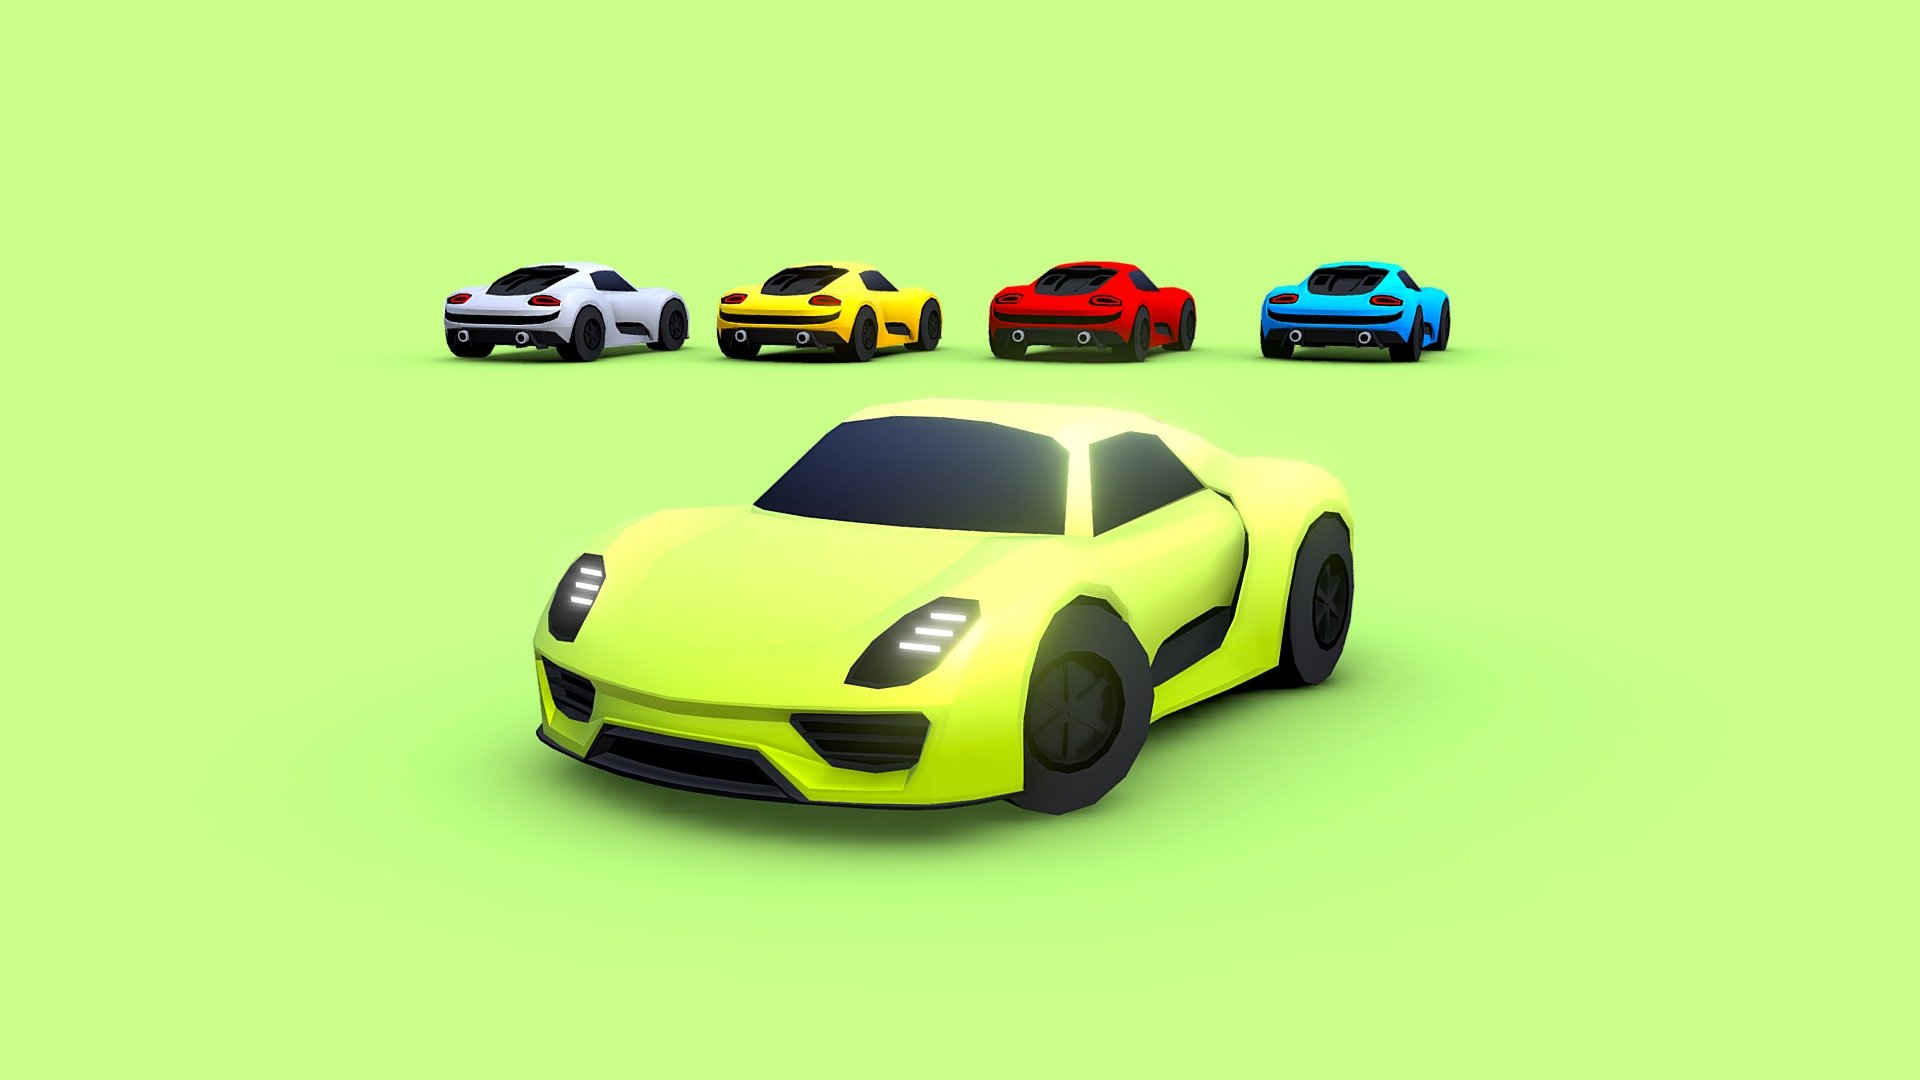 5 colors.

3510 triangles (wheels included).

FBX files included.

Cars use 2 materials (texture atlas of 512px * 512px).

Cartoon design.

This car is part of: CARS - Cute Racing Set - Cartoon Hypercar 2015 - Buy Royalty Free 3D model by SunsetStudio 3d model